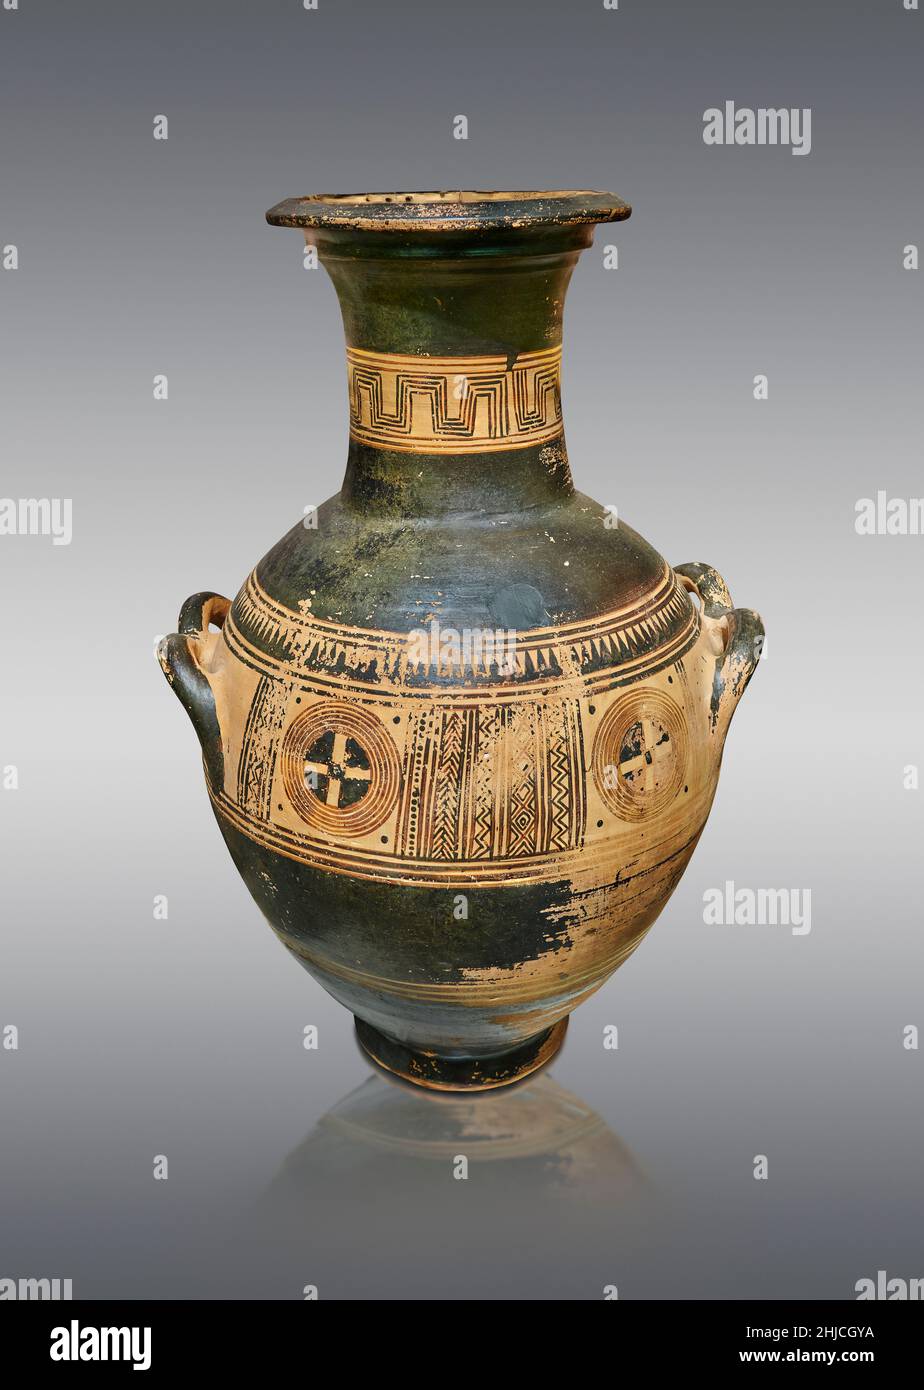 Geometric Period Greek pottery amphora, Tiryns, 850-900 BC . Nafplion Archaeological Museum. : Against grey background. Photographer Paul E Williams. Stock Photo